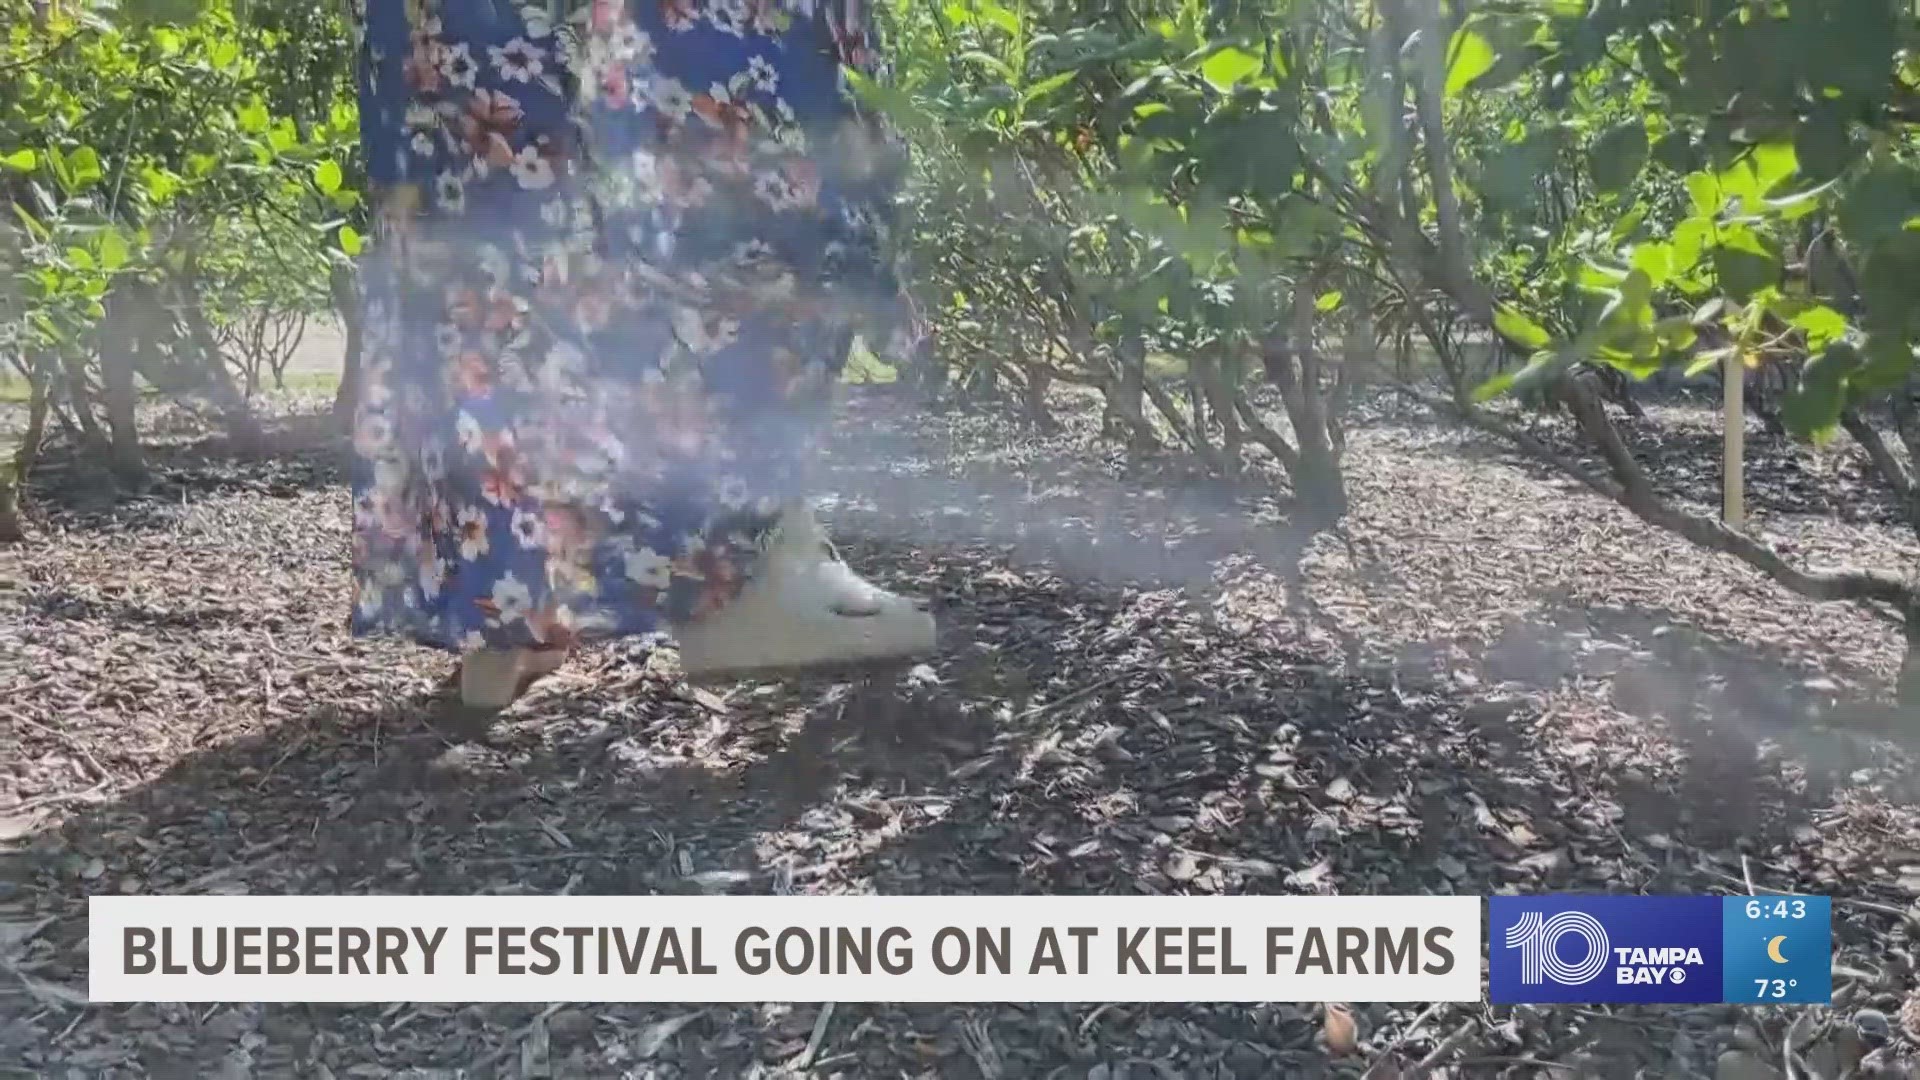 The annual seasonal festival showcases the importance of agriculture for the community.